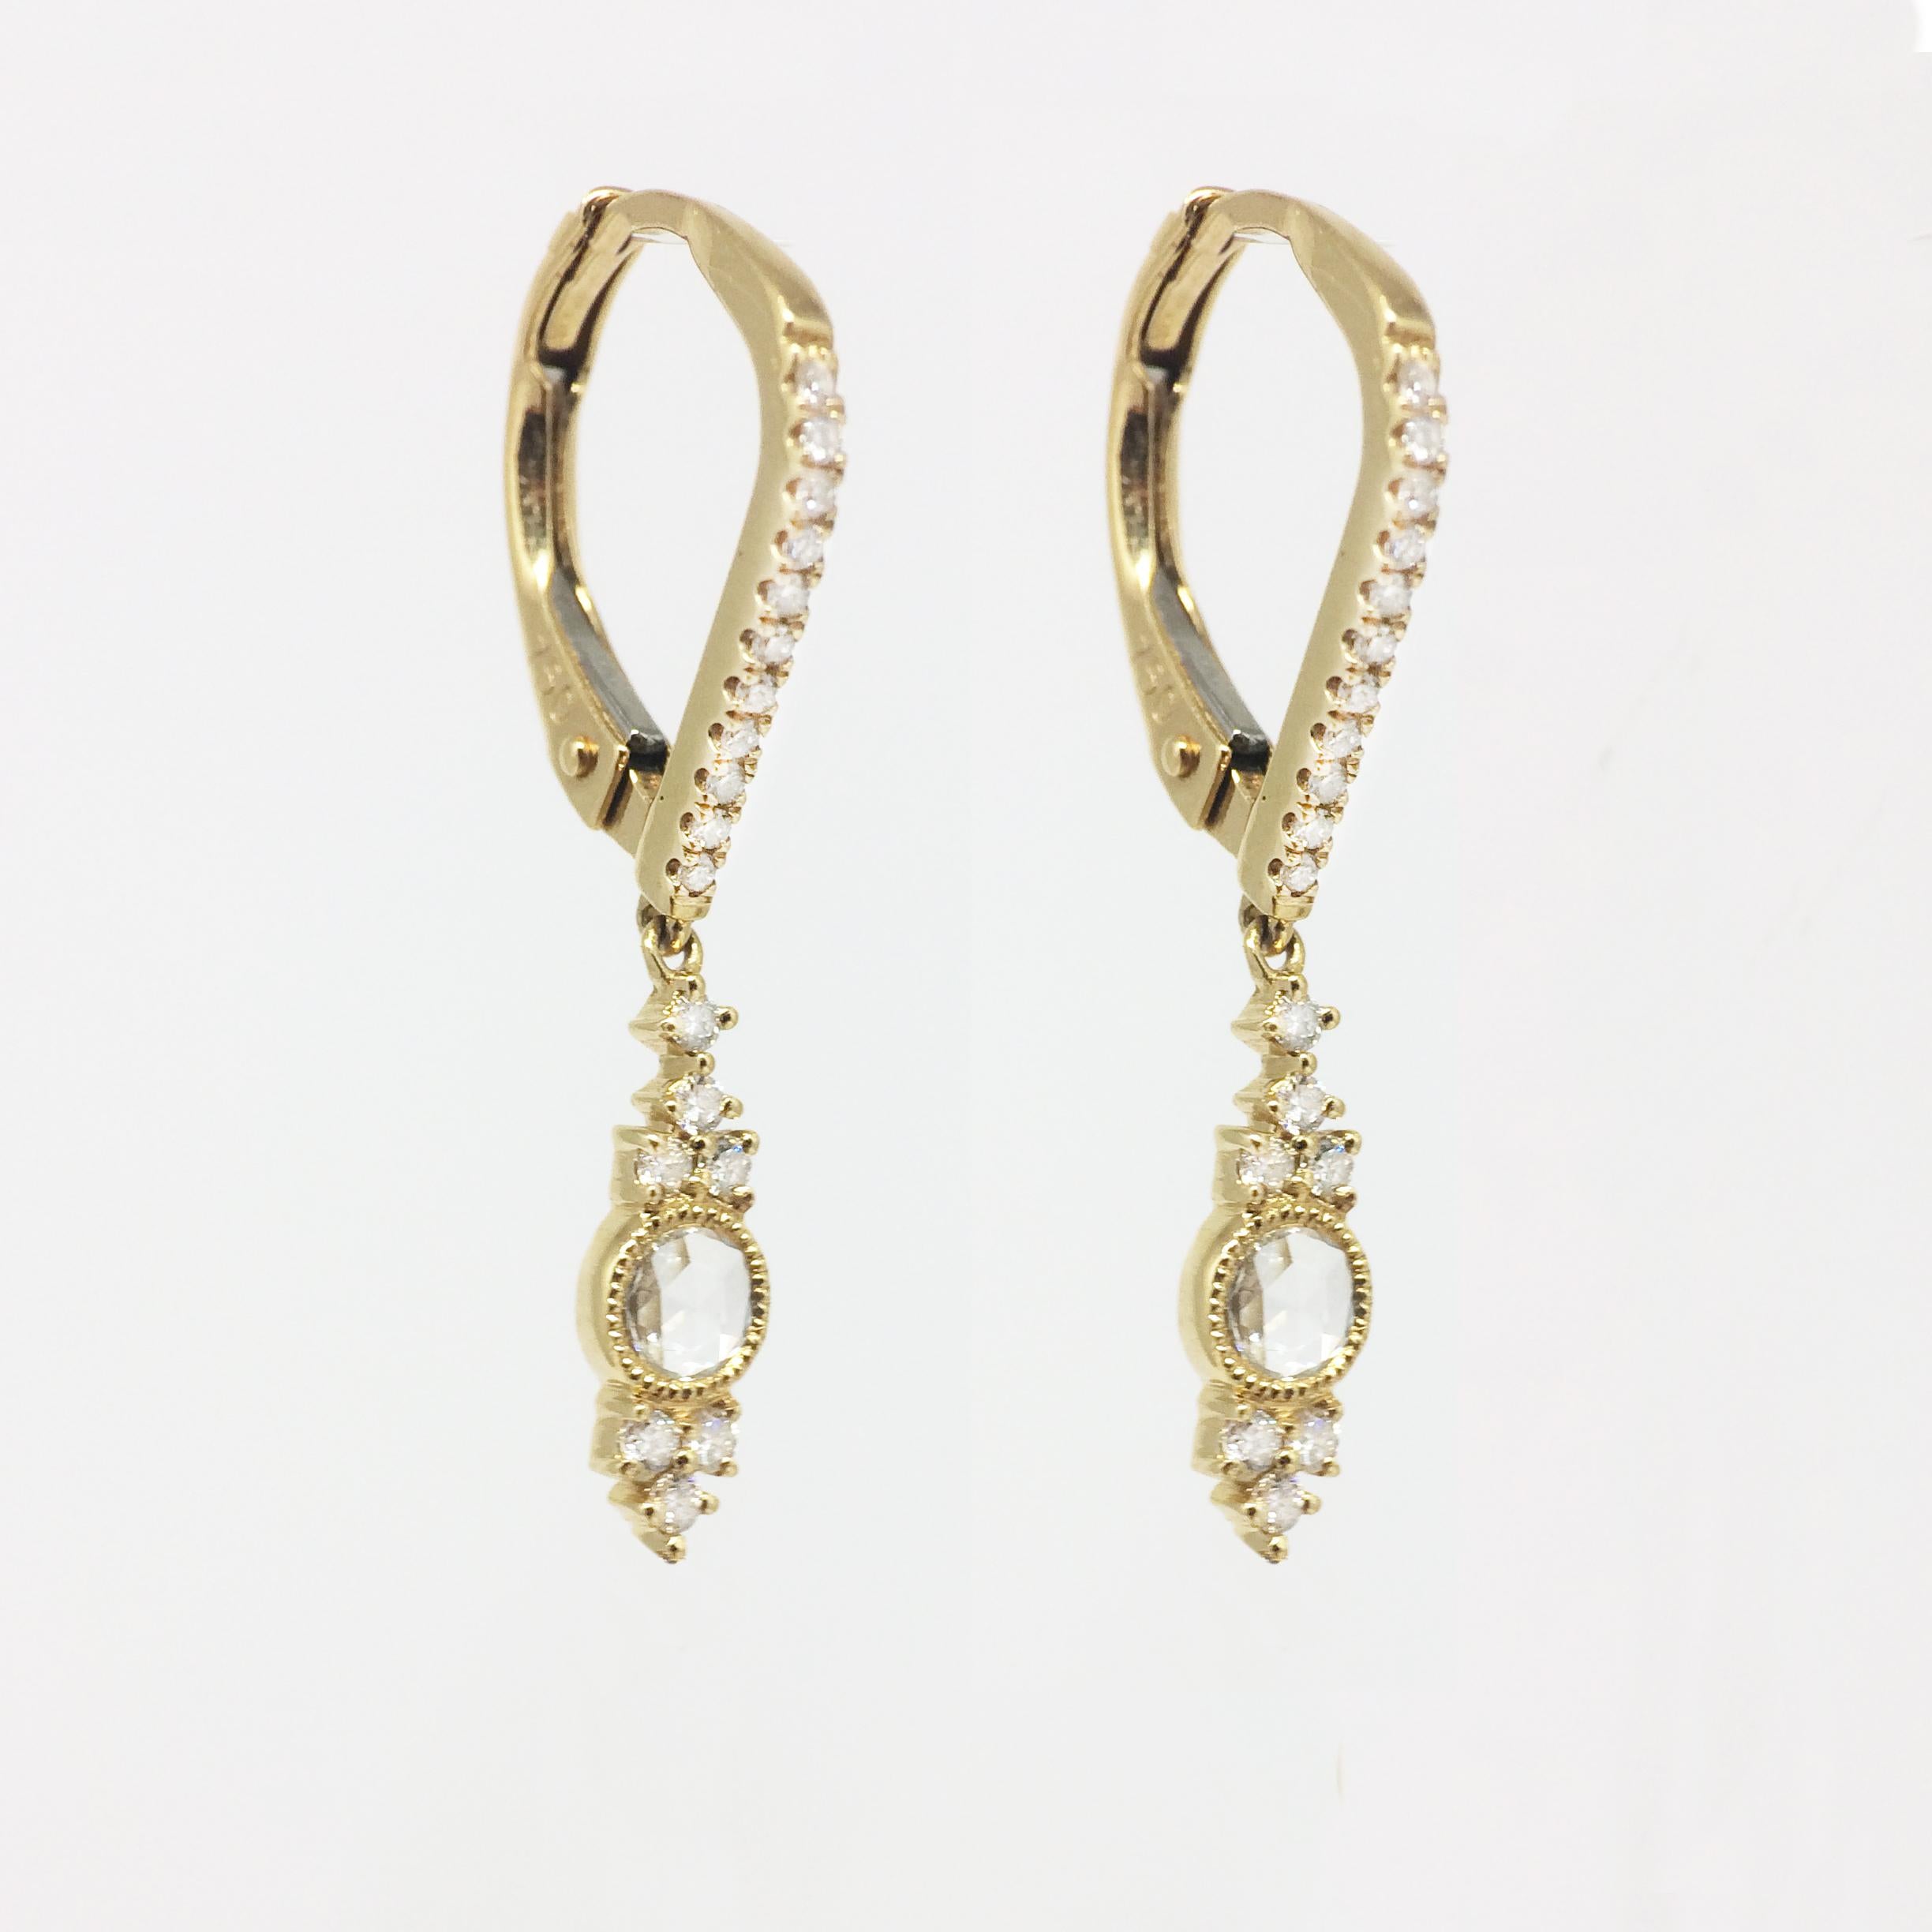 By Stone Paris

Dangle earrings
18-kt yellow gold 1.87g
40 GVS white diamonds 0.29 ct
Dormeuse system - Length : 2.09 cm
Size of the pattern : 1.09 x 0.35 cm

This jewel is also available in white gold, pink gold, and black gold.
For more